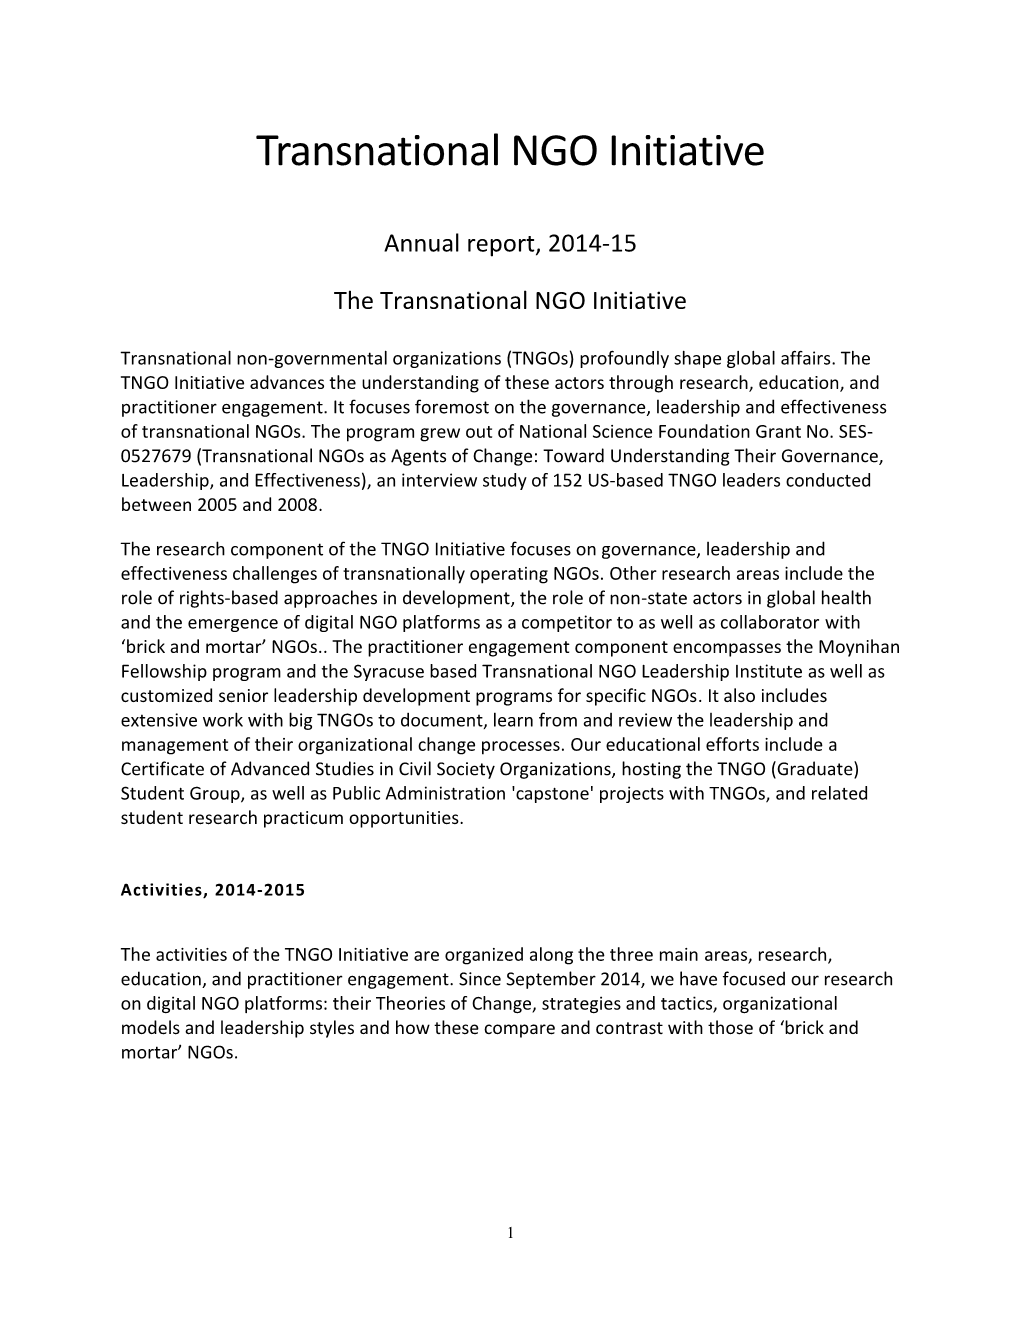 Transnational NGO Initiative Annual Report 2014-2015